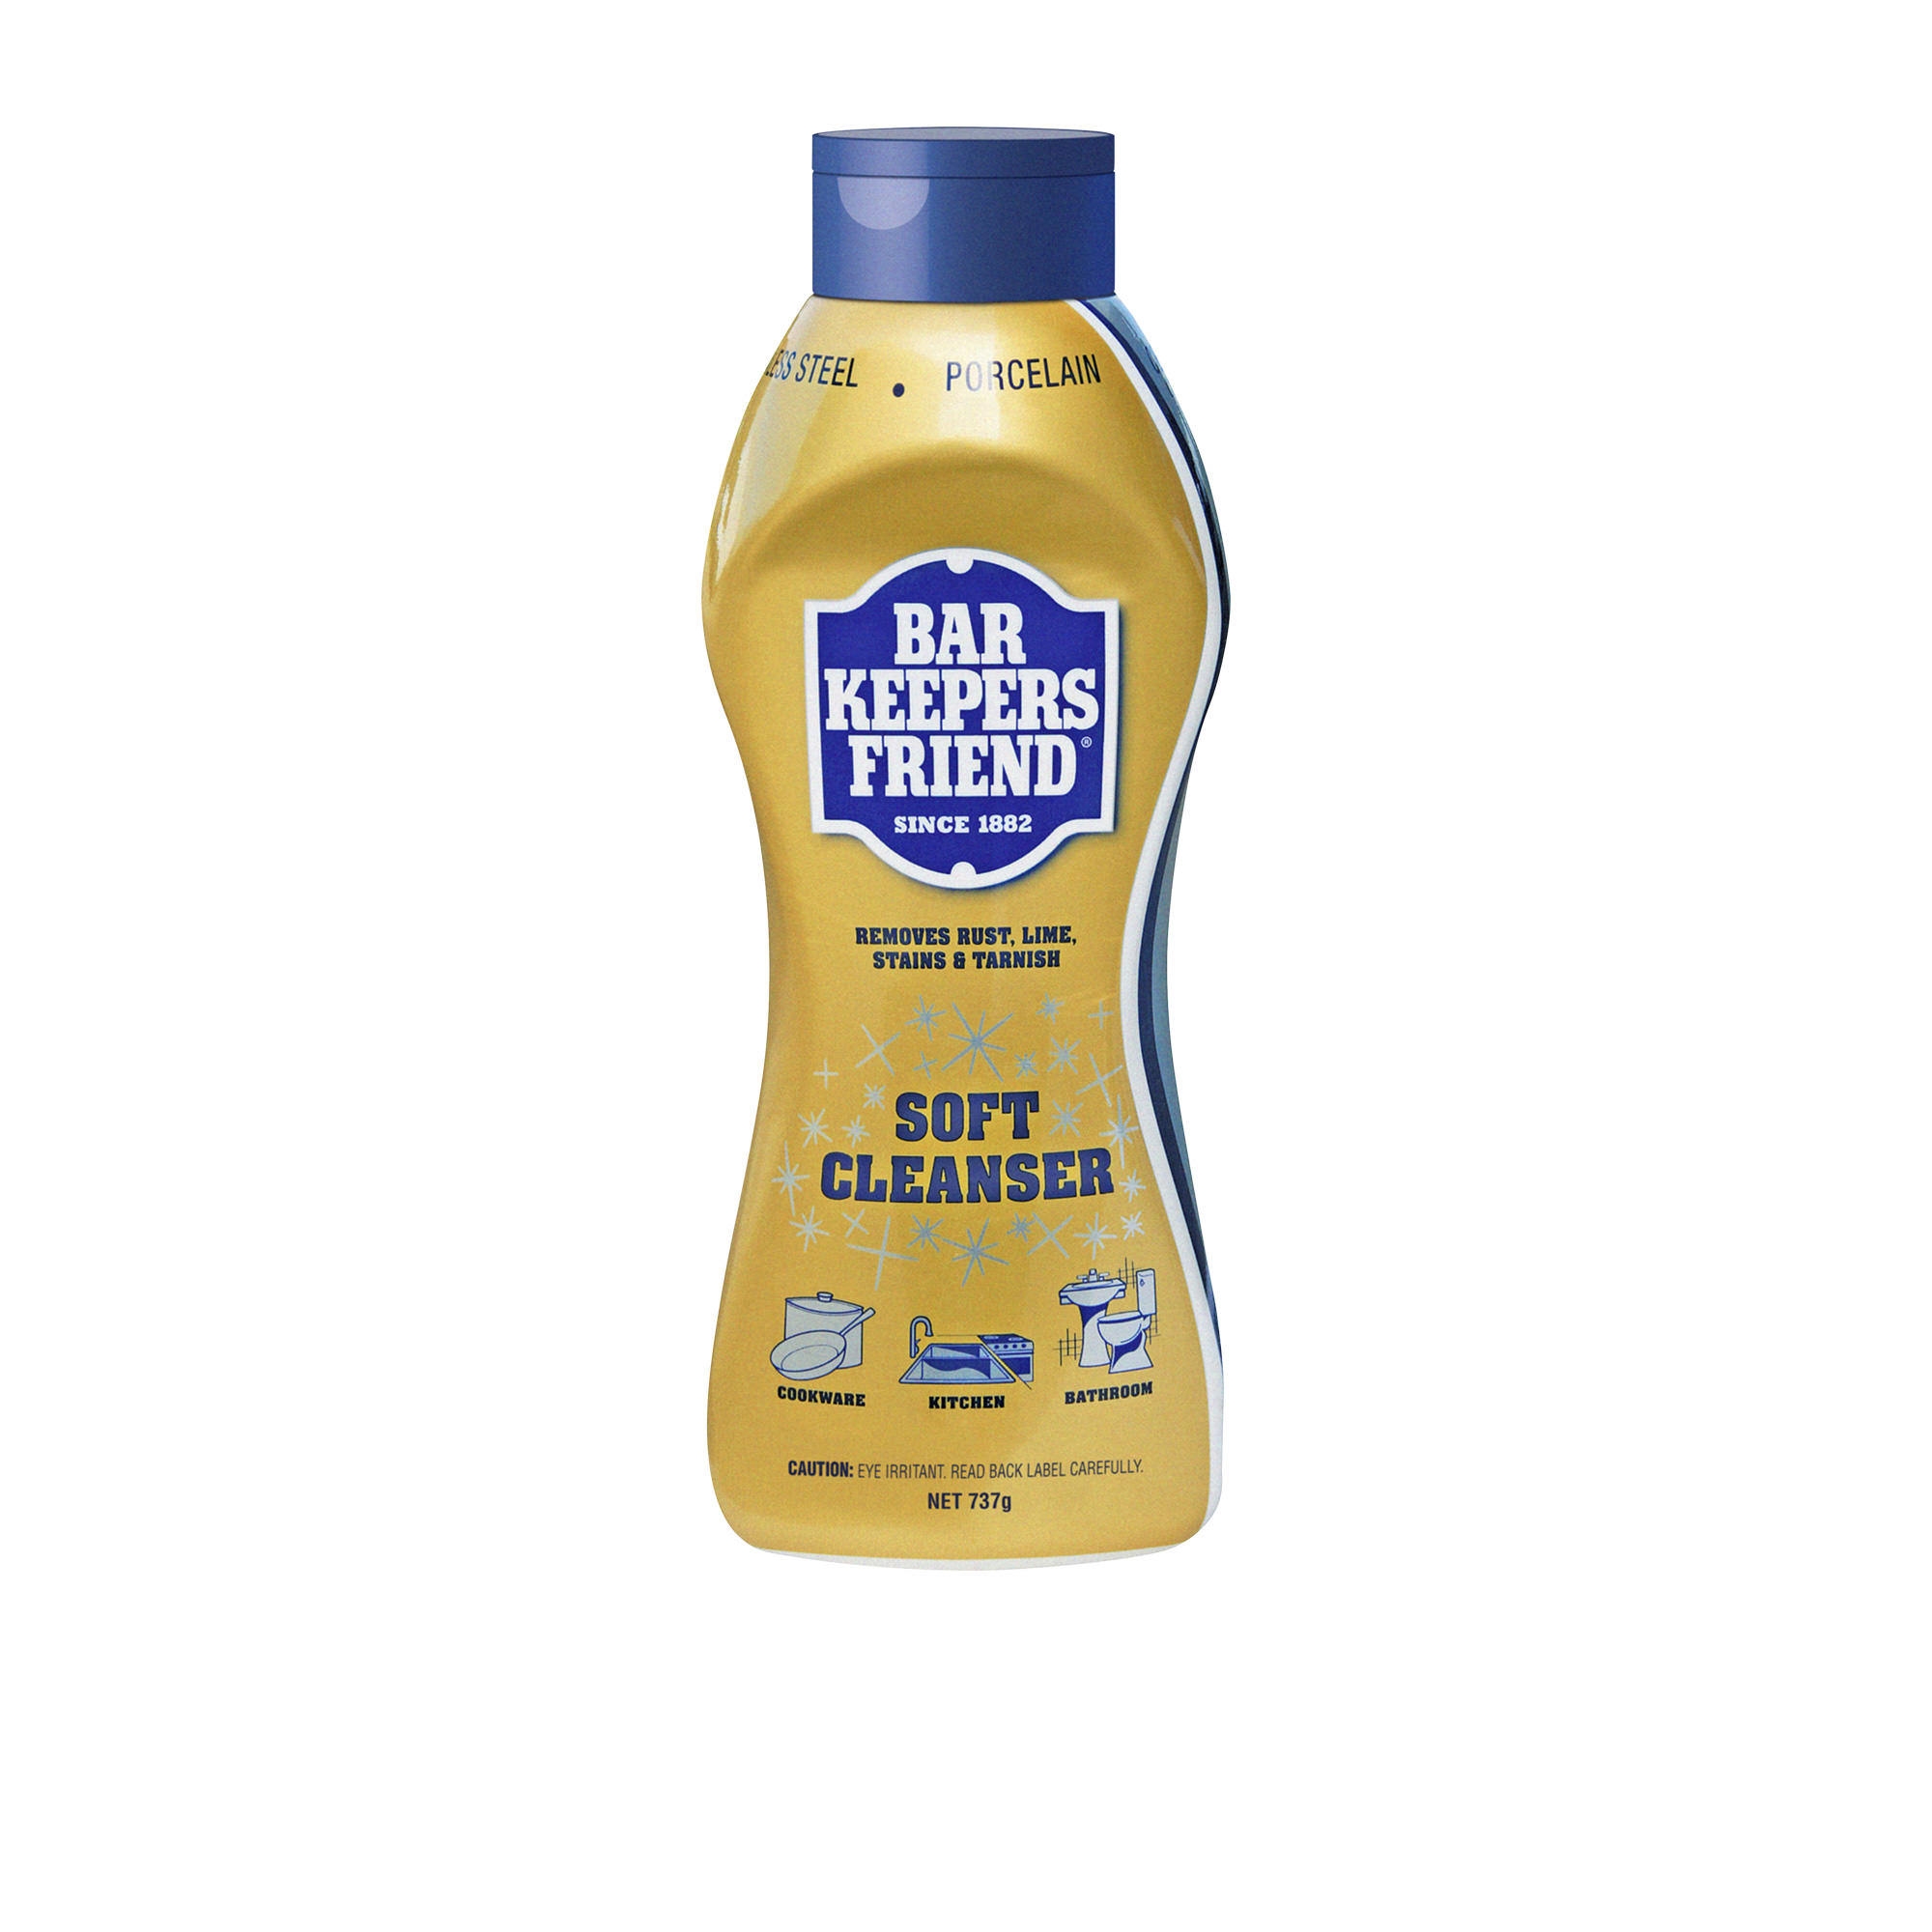 Bar Keepers Friend Soft Cleanser 737g Image 1